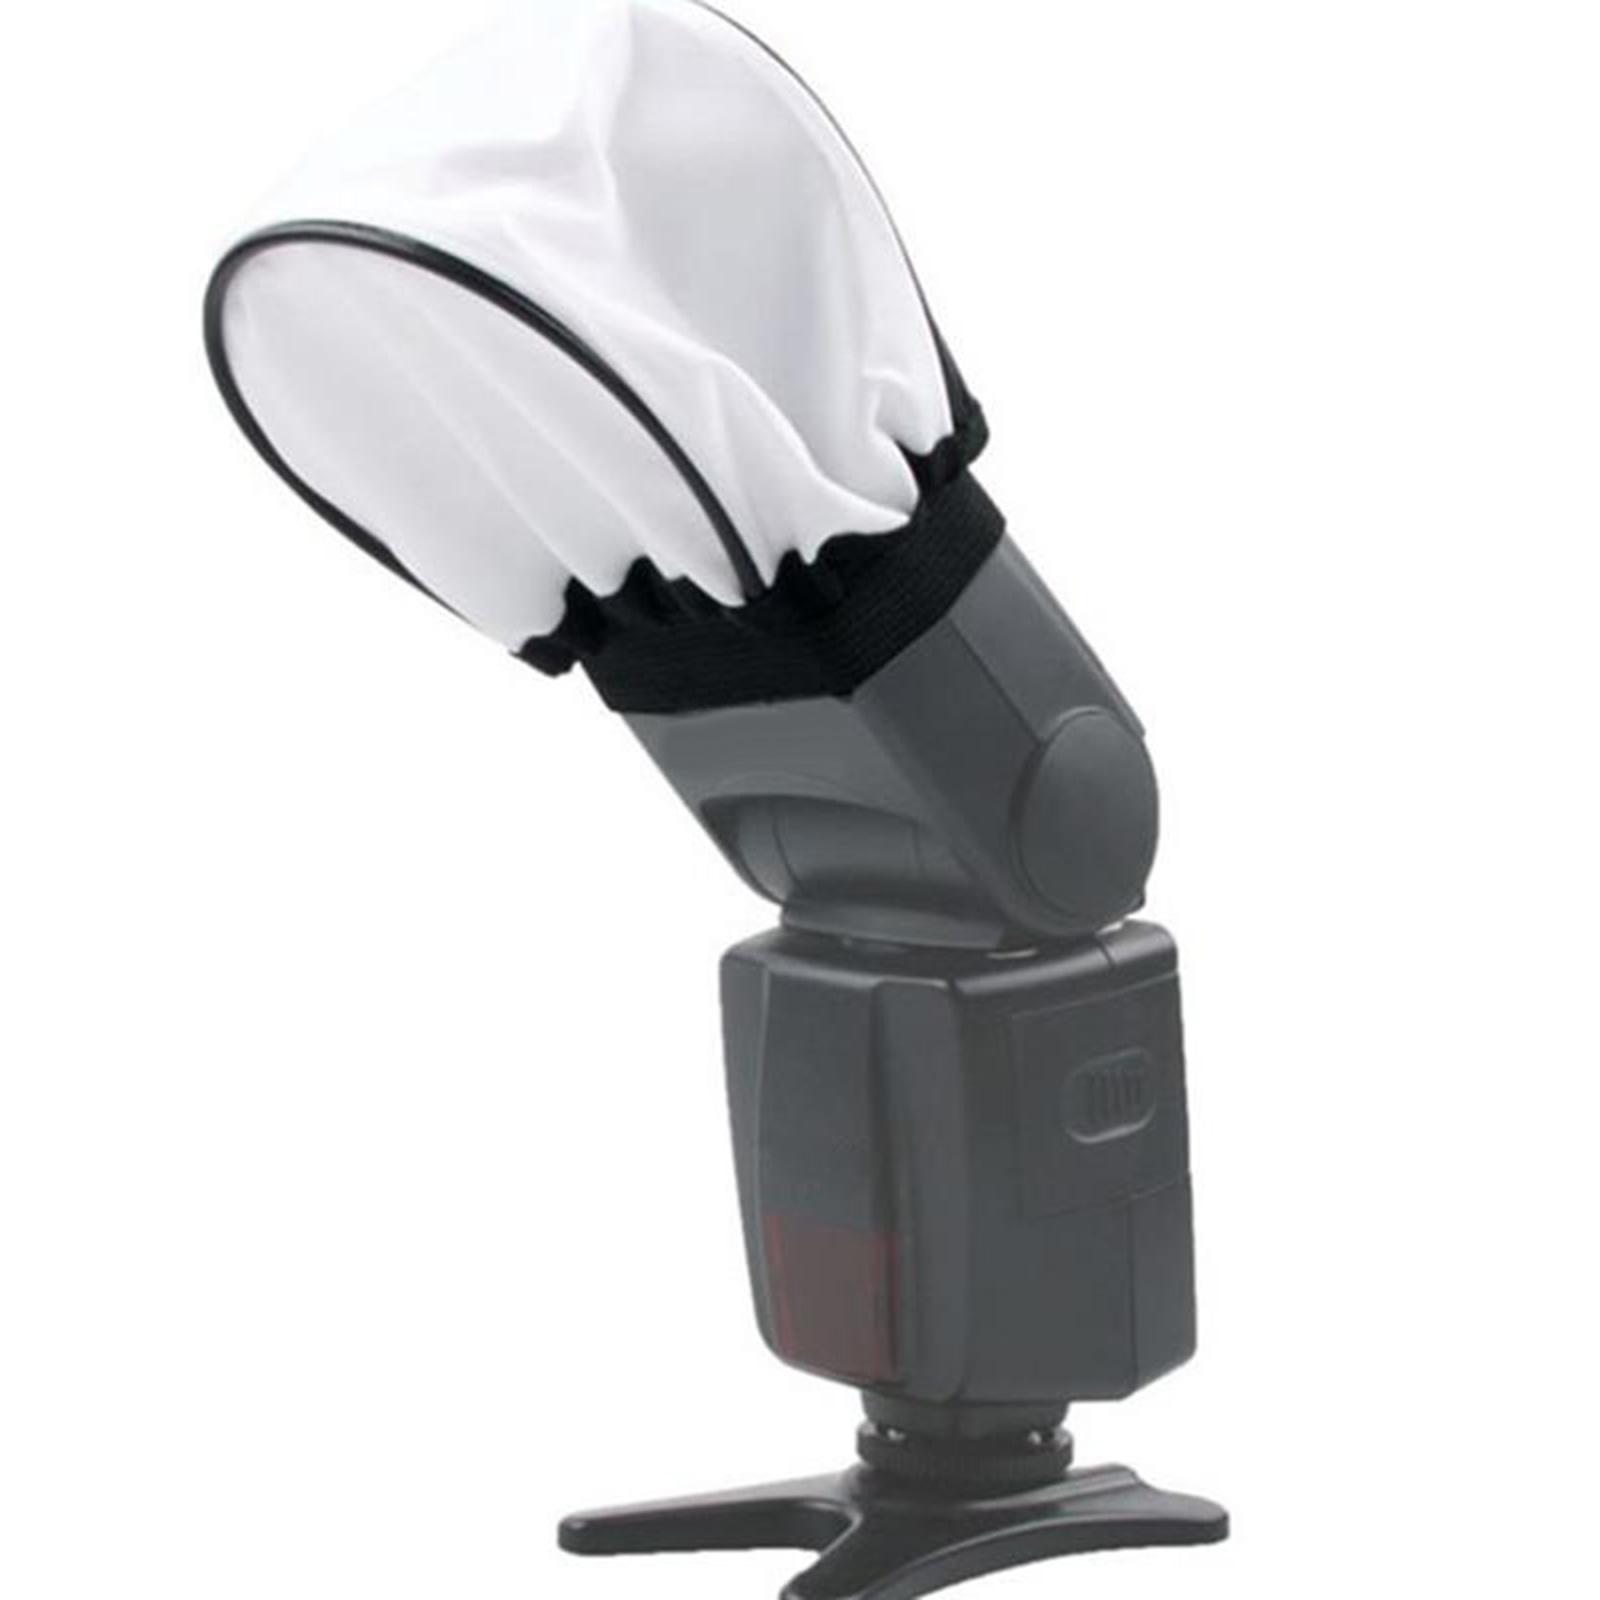 Flash Light Softbox Durable Photography Flash Lens Diffuser for DSLR Cameras